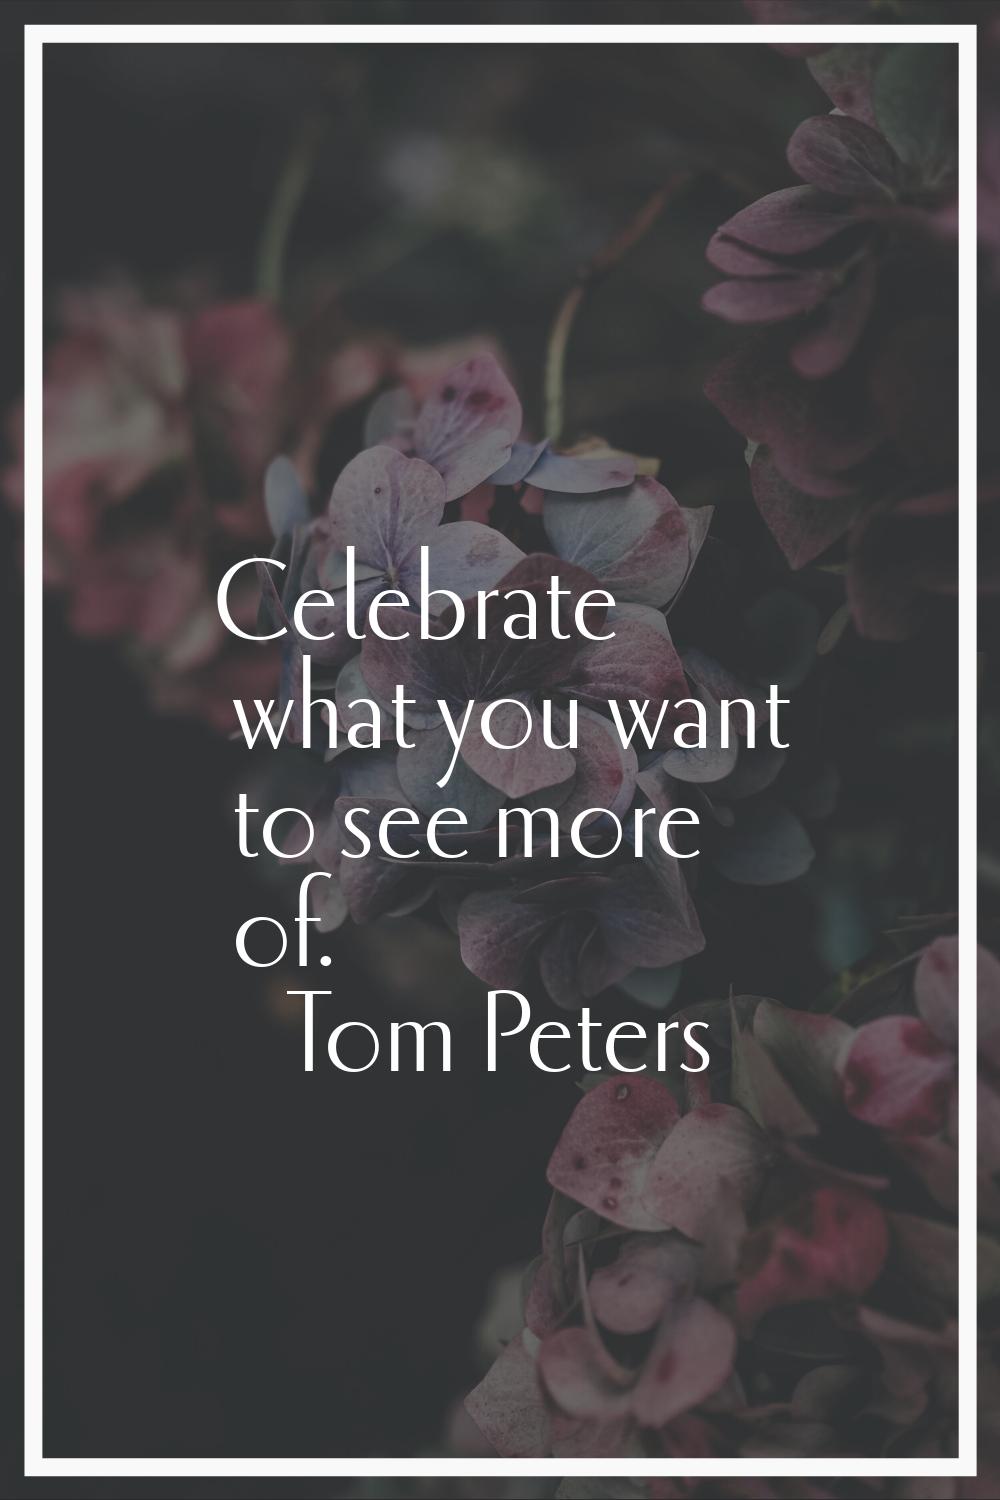 Celebrate what you want to see more of.